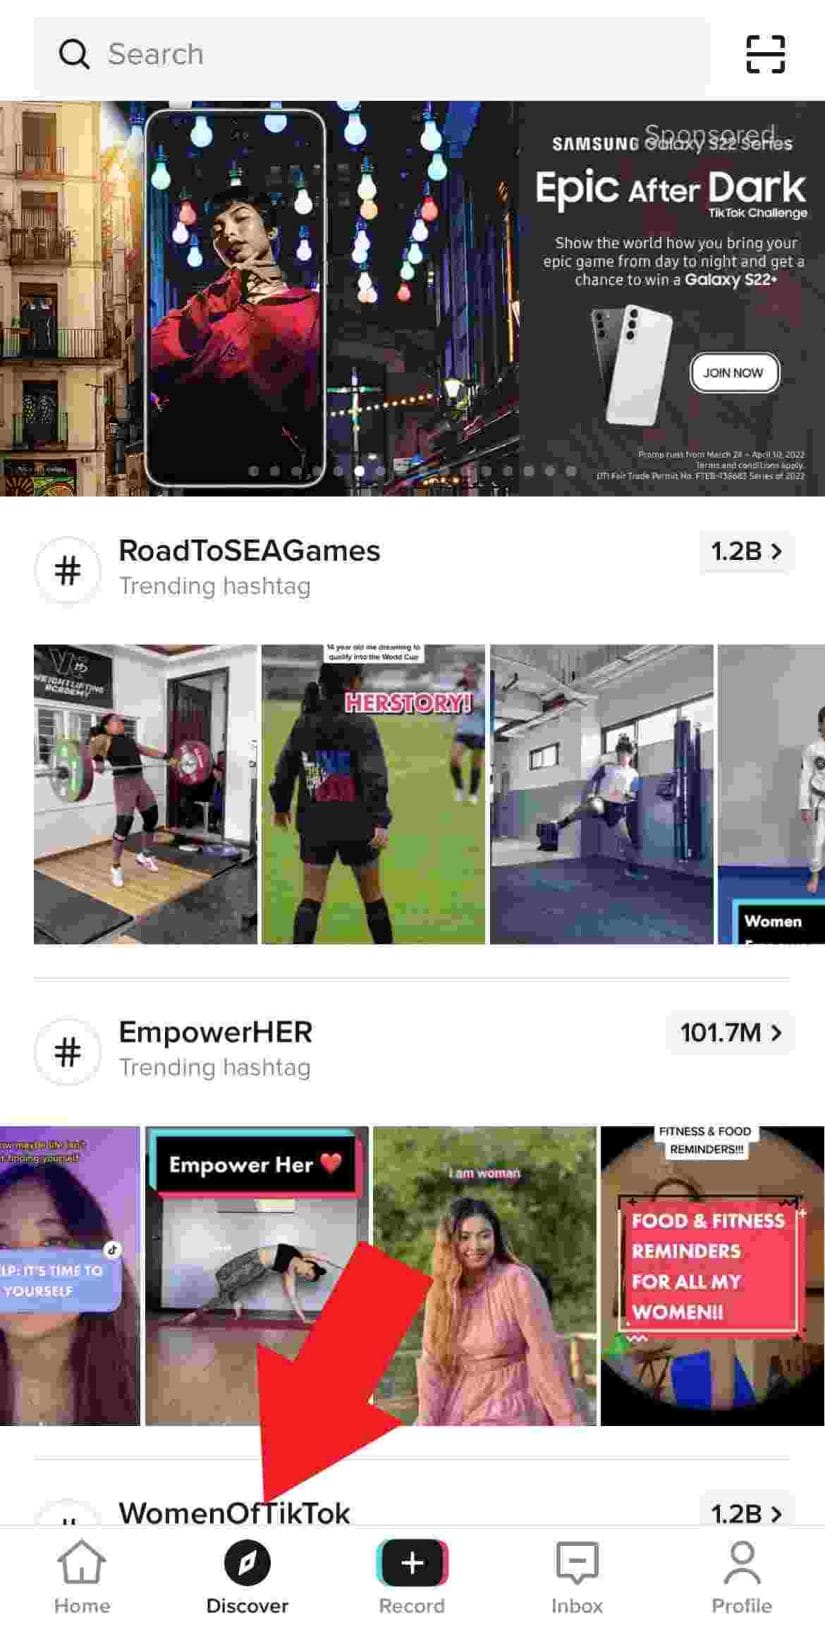 Arrow pointing at the "discover" button on TikTok